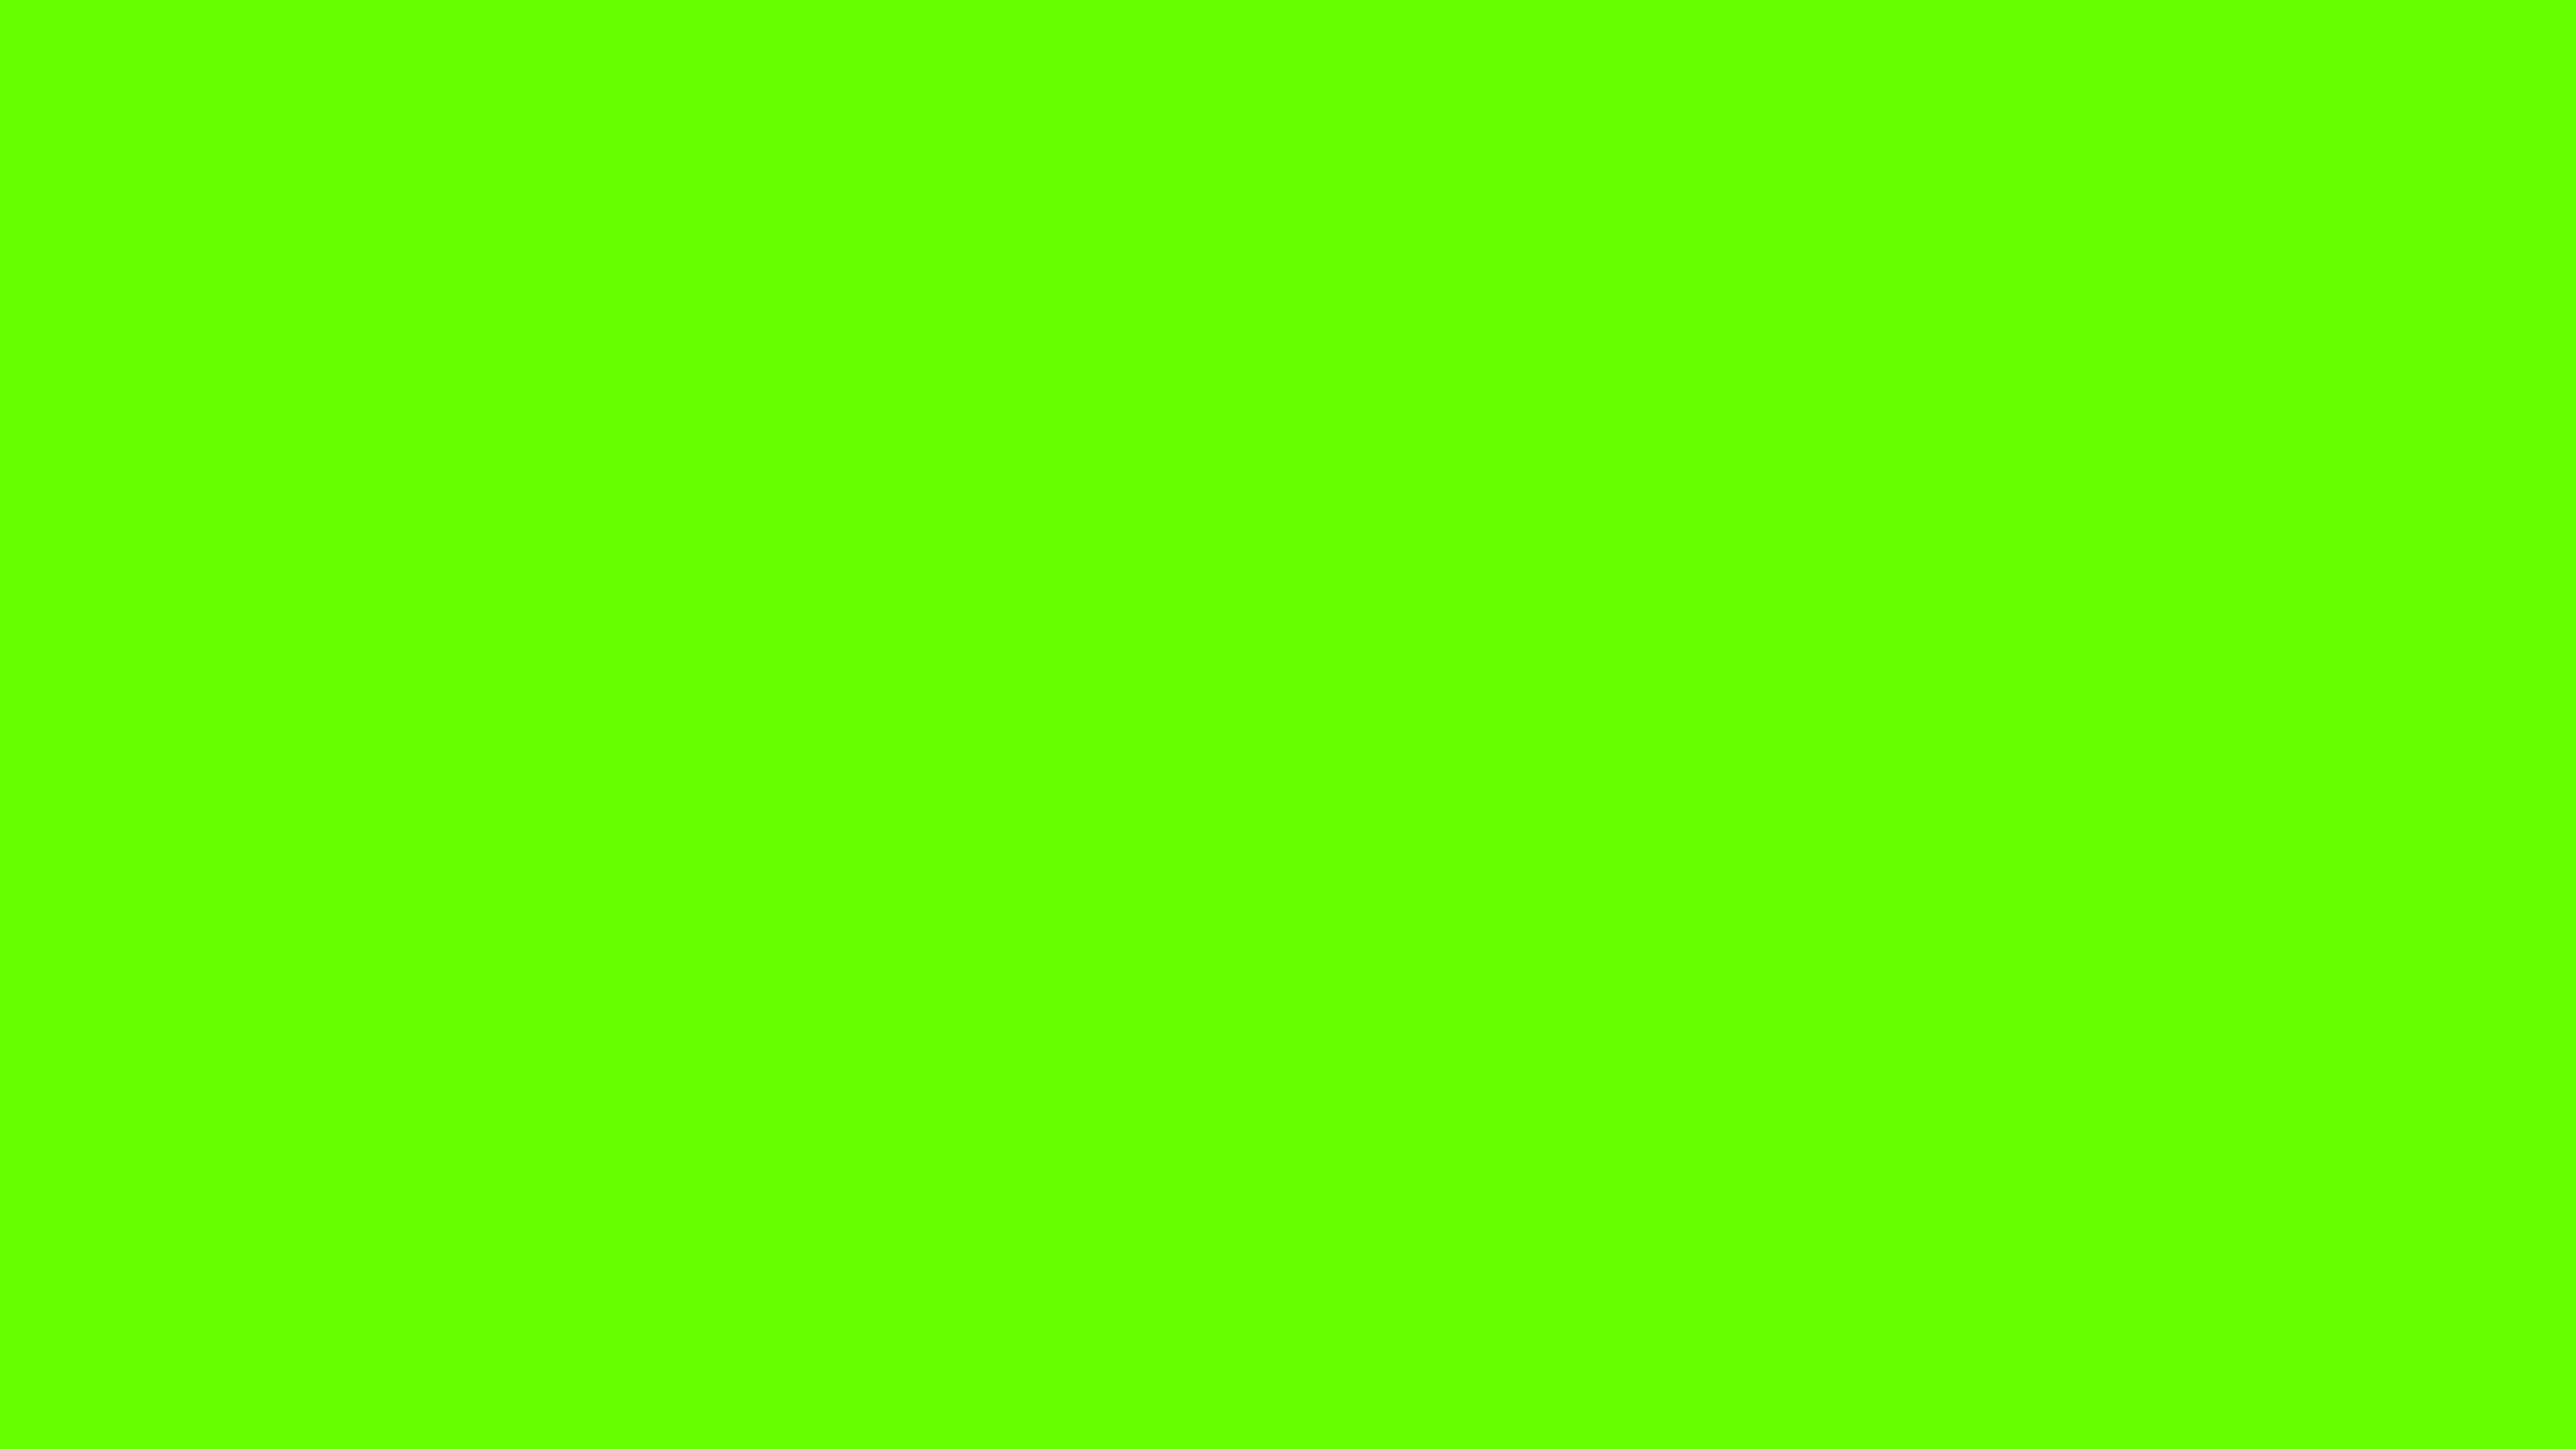 5120x2880 Bright Green Solid Color Background